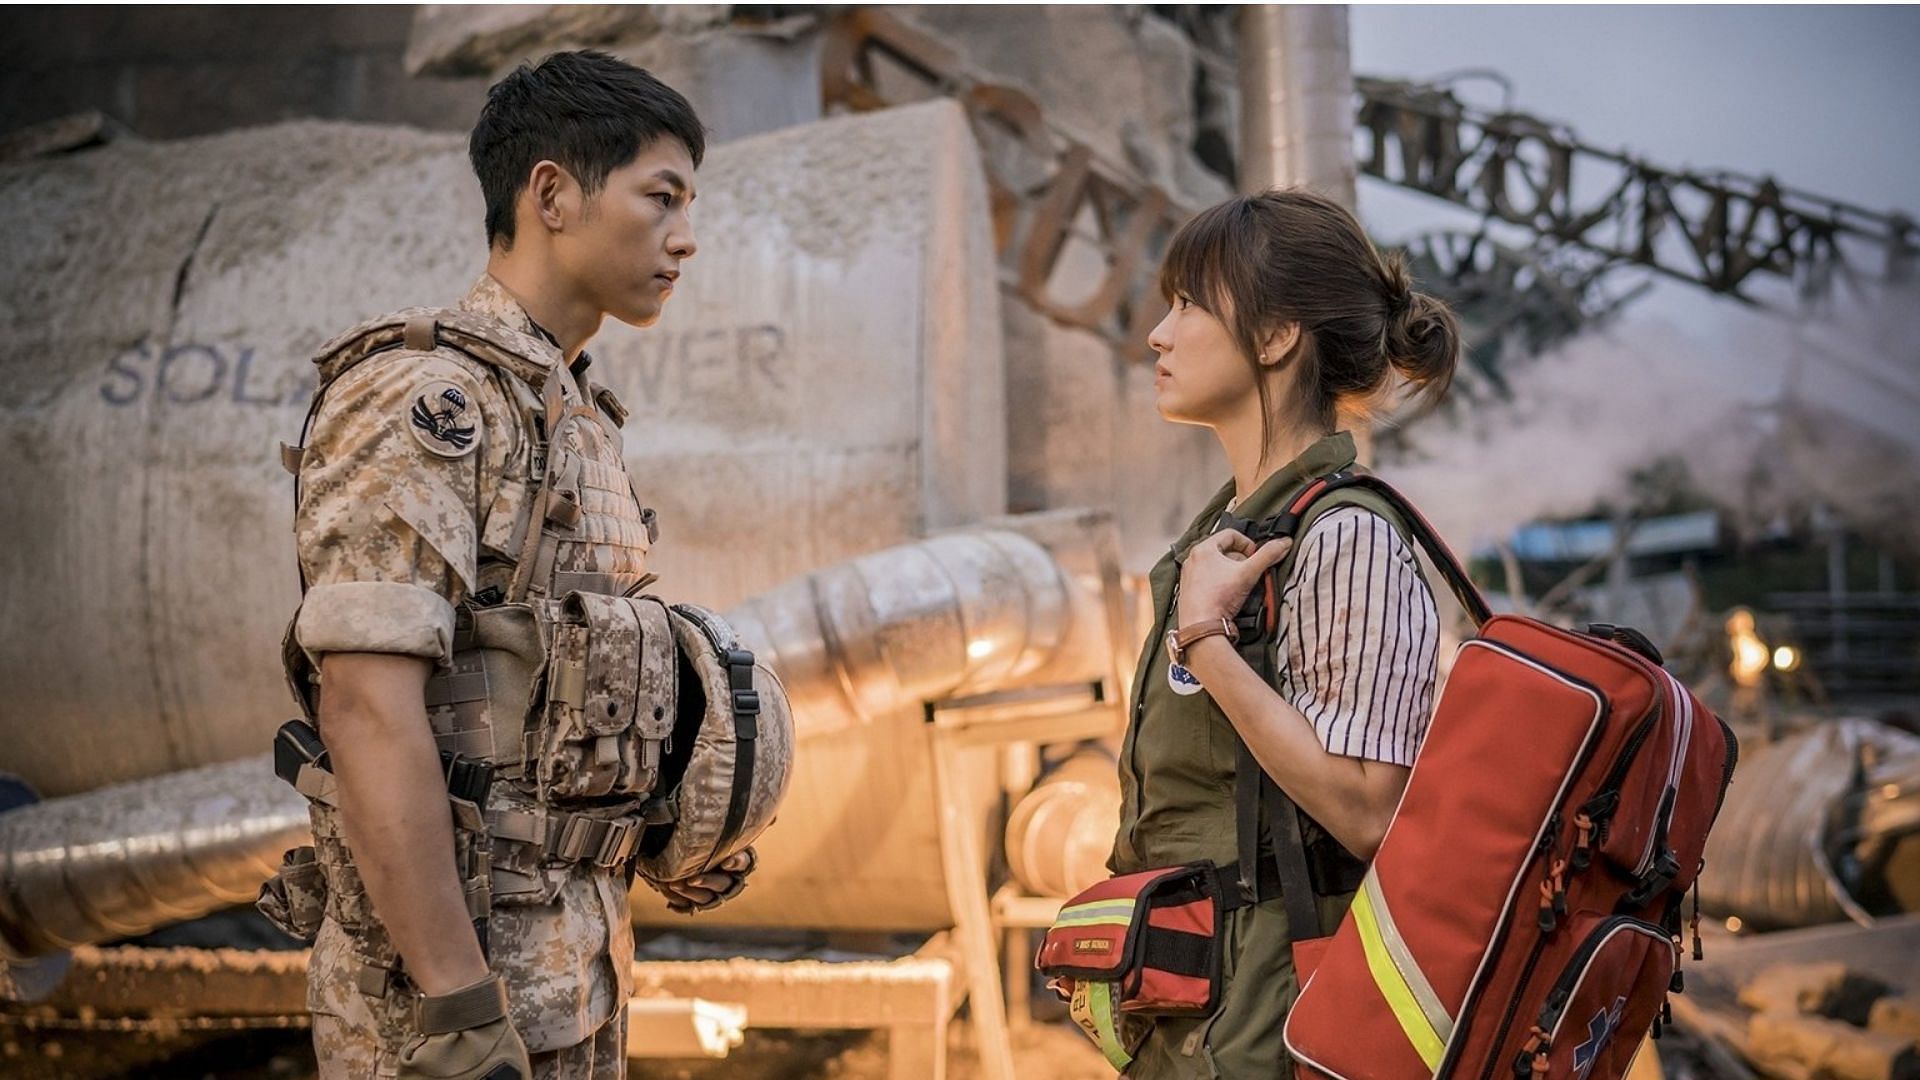 Shocking Update: Song Joong-ki and Song Hye-kyo Relationship Status Revealed - Are They Still Together? 13